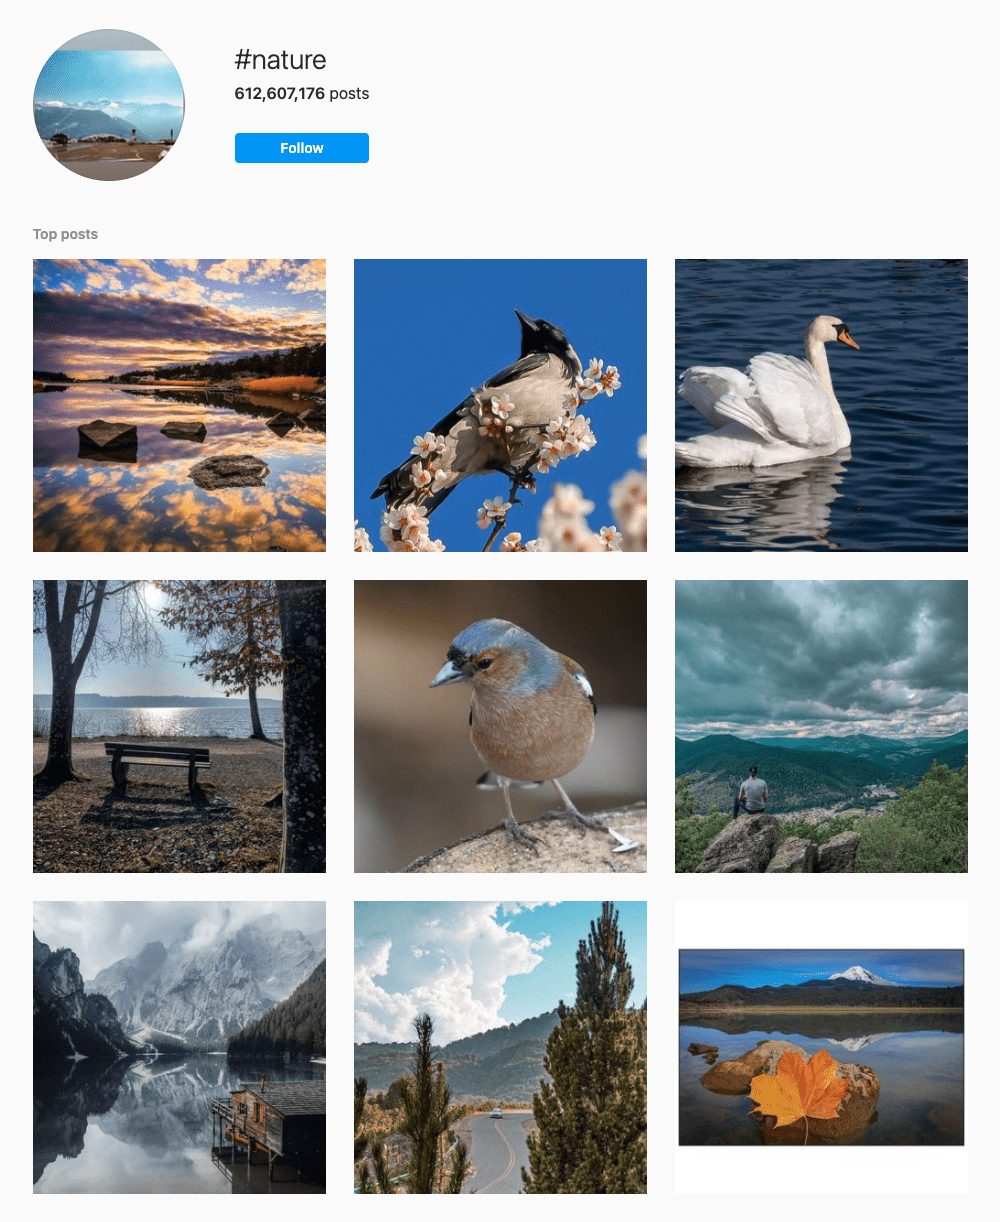 #nature Hashtags for Instagram